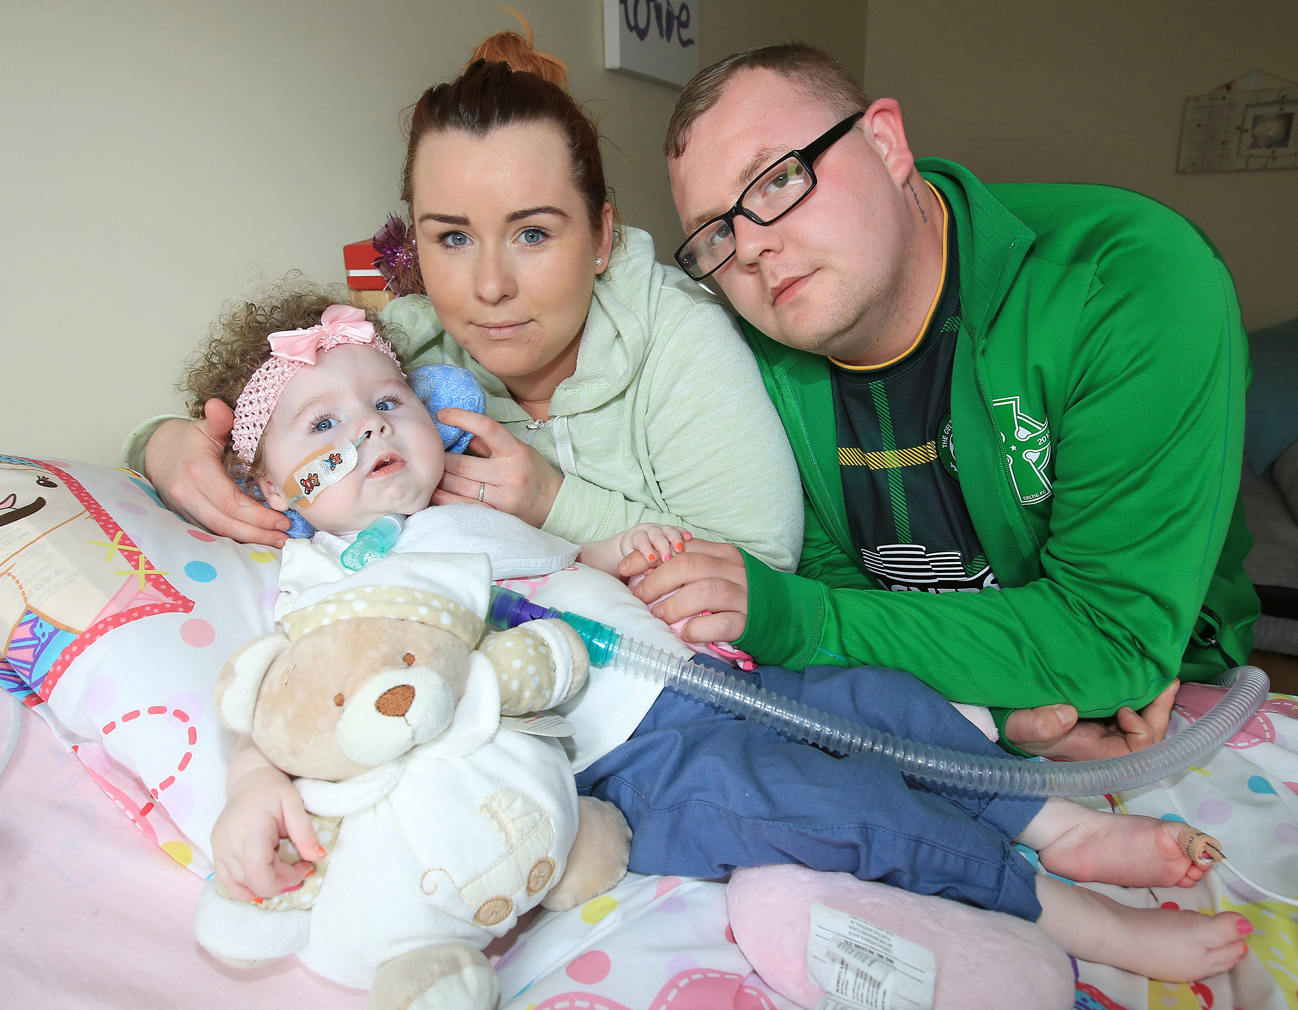 Caoilte Fitzsimons with her parents Robert Fitzsimons and Fiona Murphy. They\'ve been left distraught after an internet troll directed vile abuse at their baby girl 